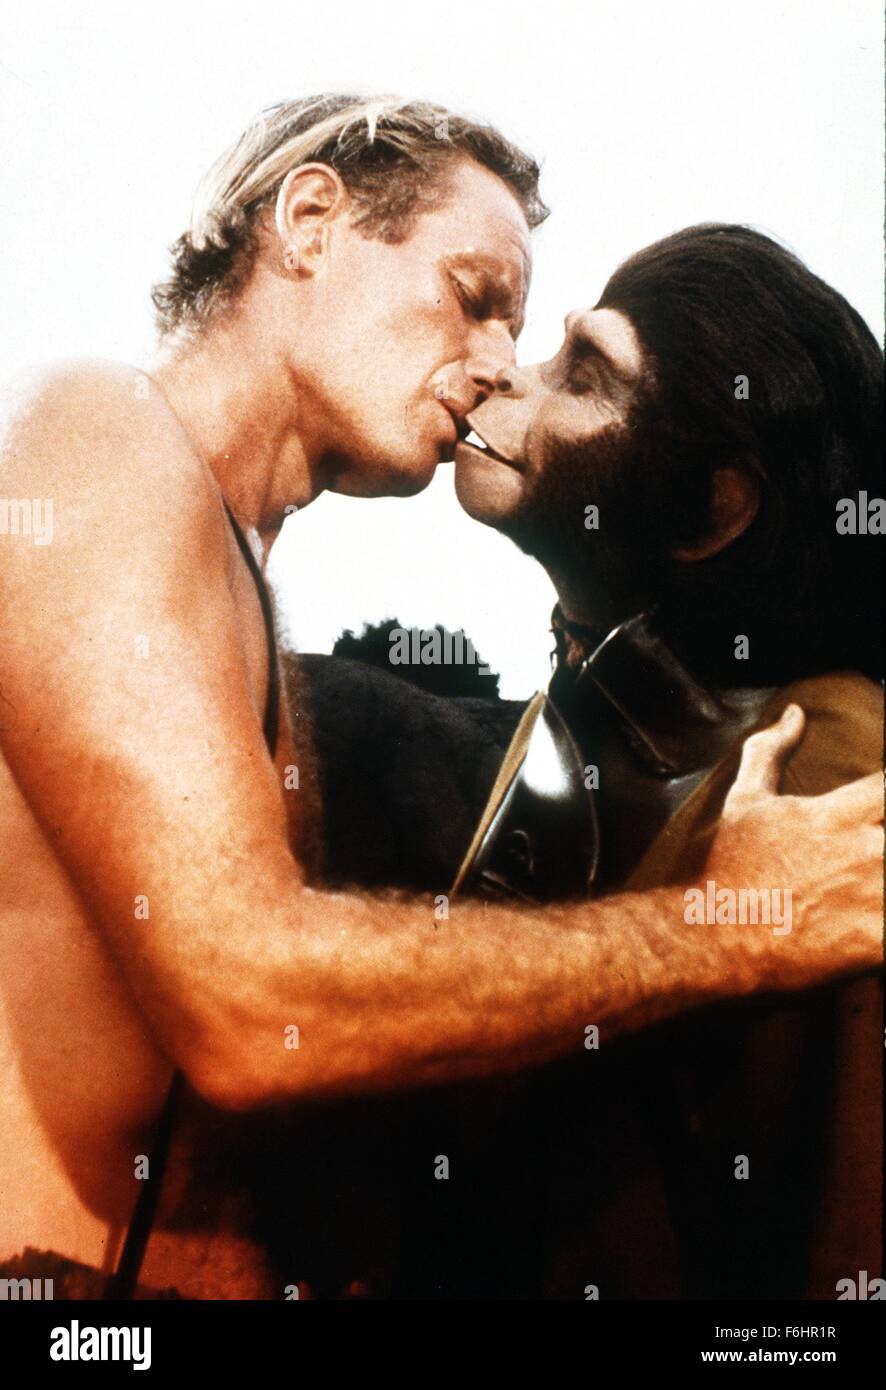 1969, Film Title: BENEATH THE PLANET OF THE APES, Director: TED POST, Studio: FOX, Pictured: CHARLTON HESTON, KIM HUNTER, KISSING, TED POST. (Credit Image: SNAP) Stock Photo